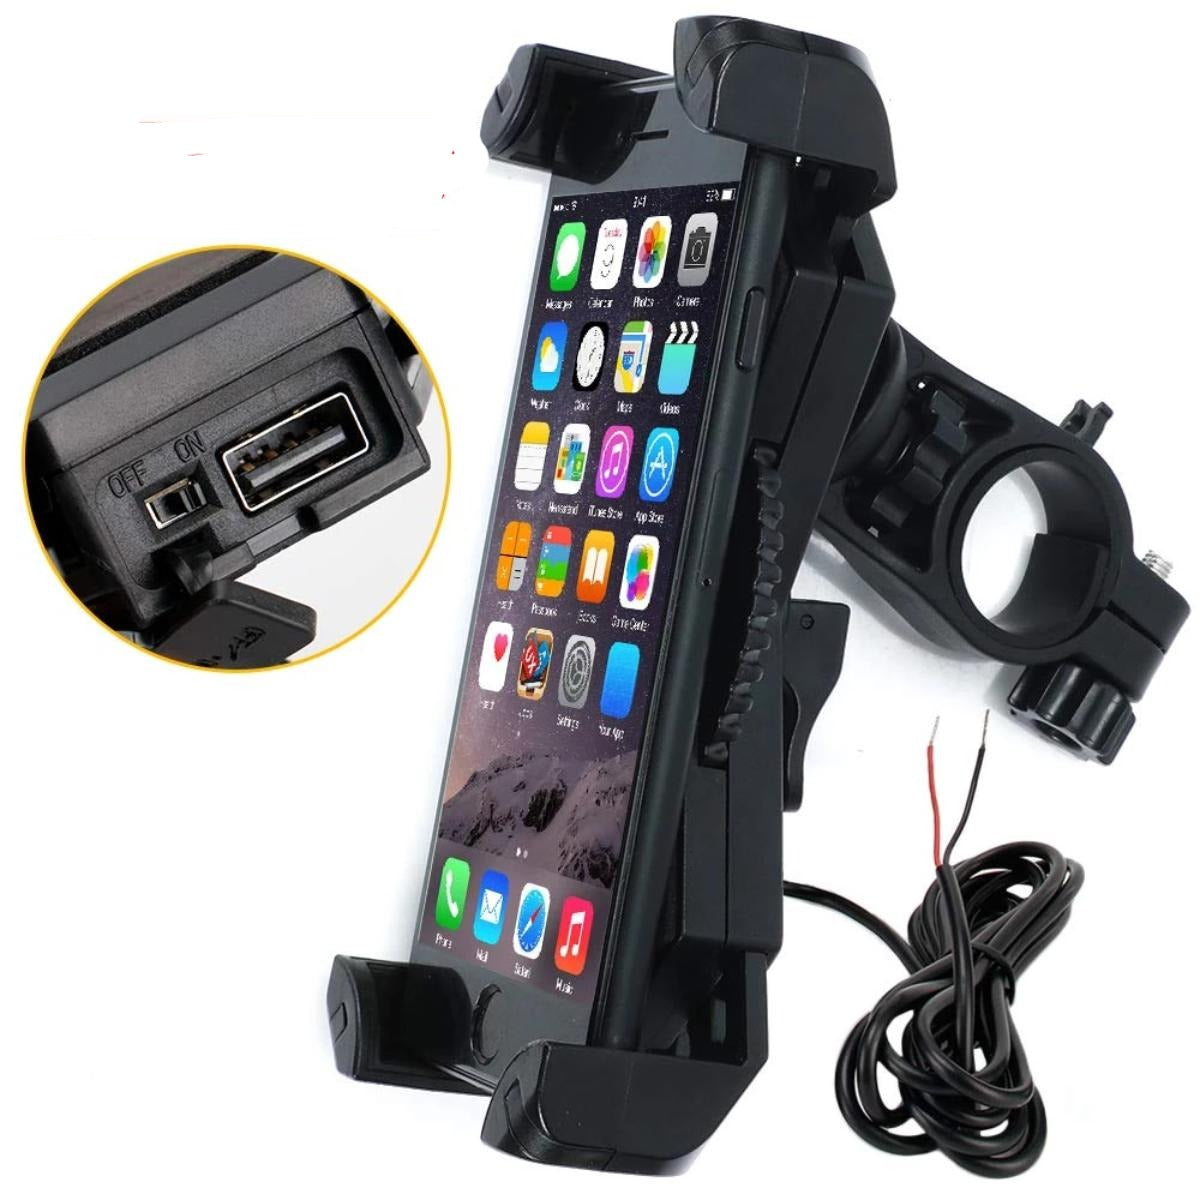 A Motorcycle Phone Mount with USB Charger Port.